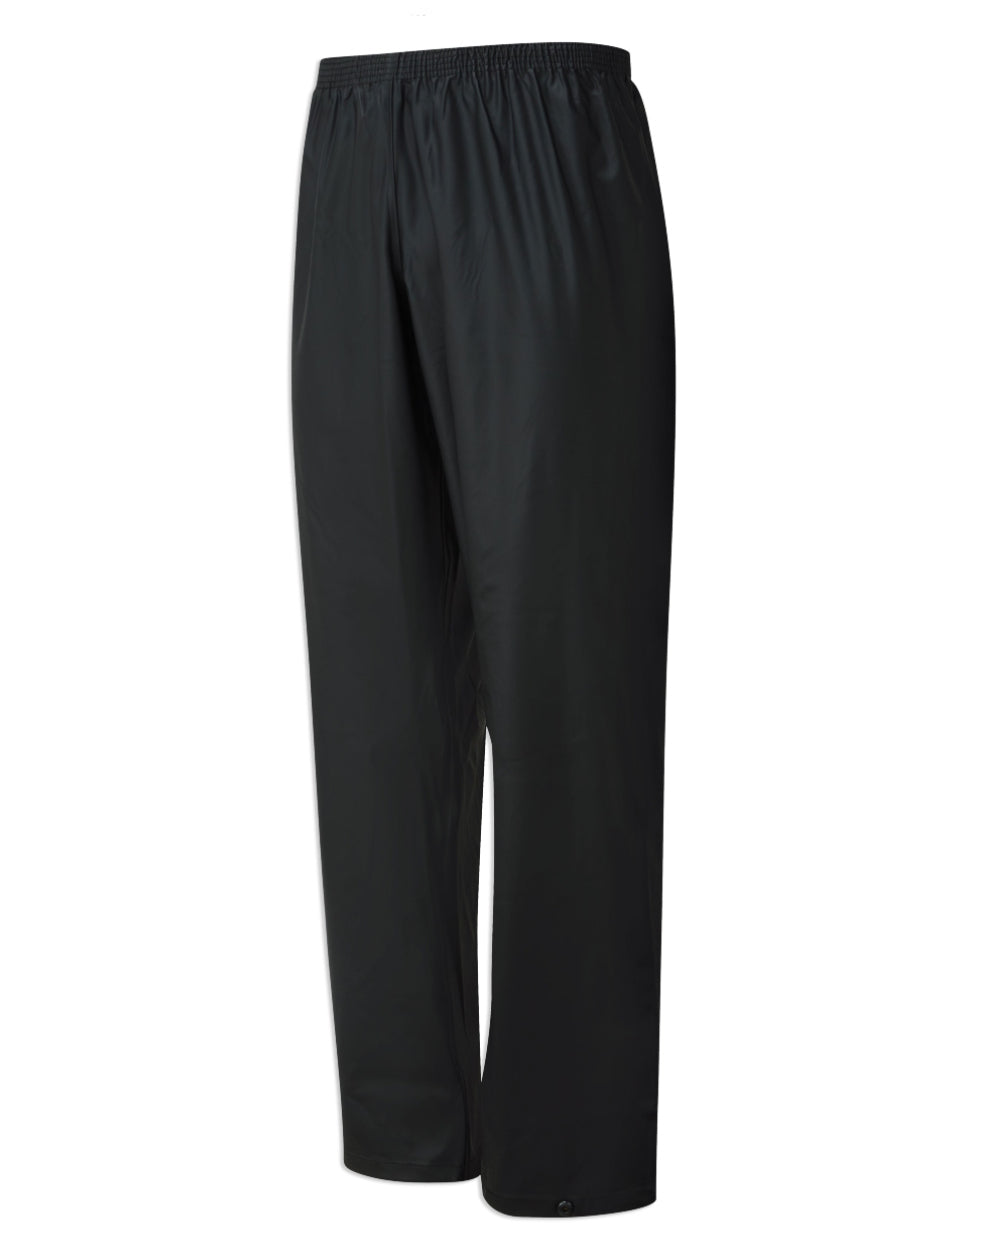 Black Coloured Fort Airflex Waterproof Breathable Trousers On A White Background 